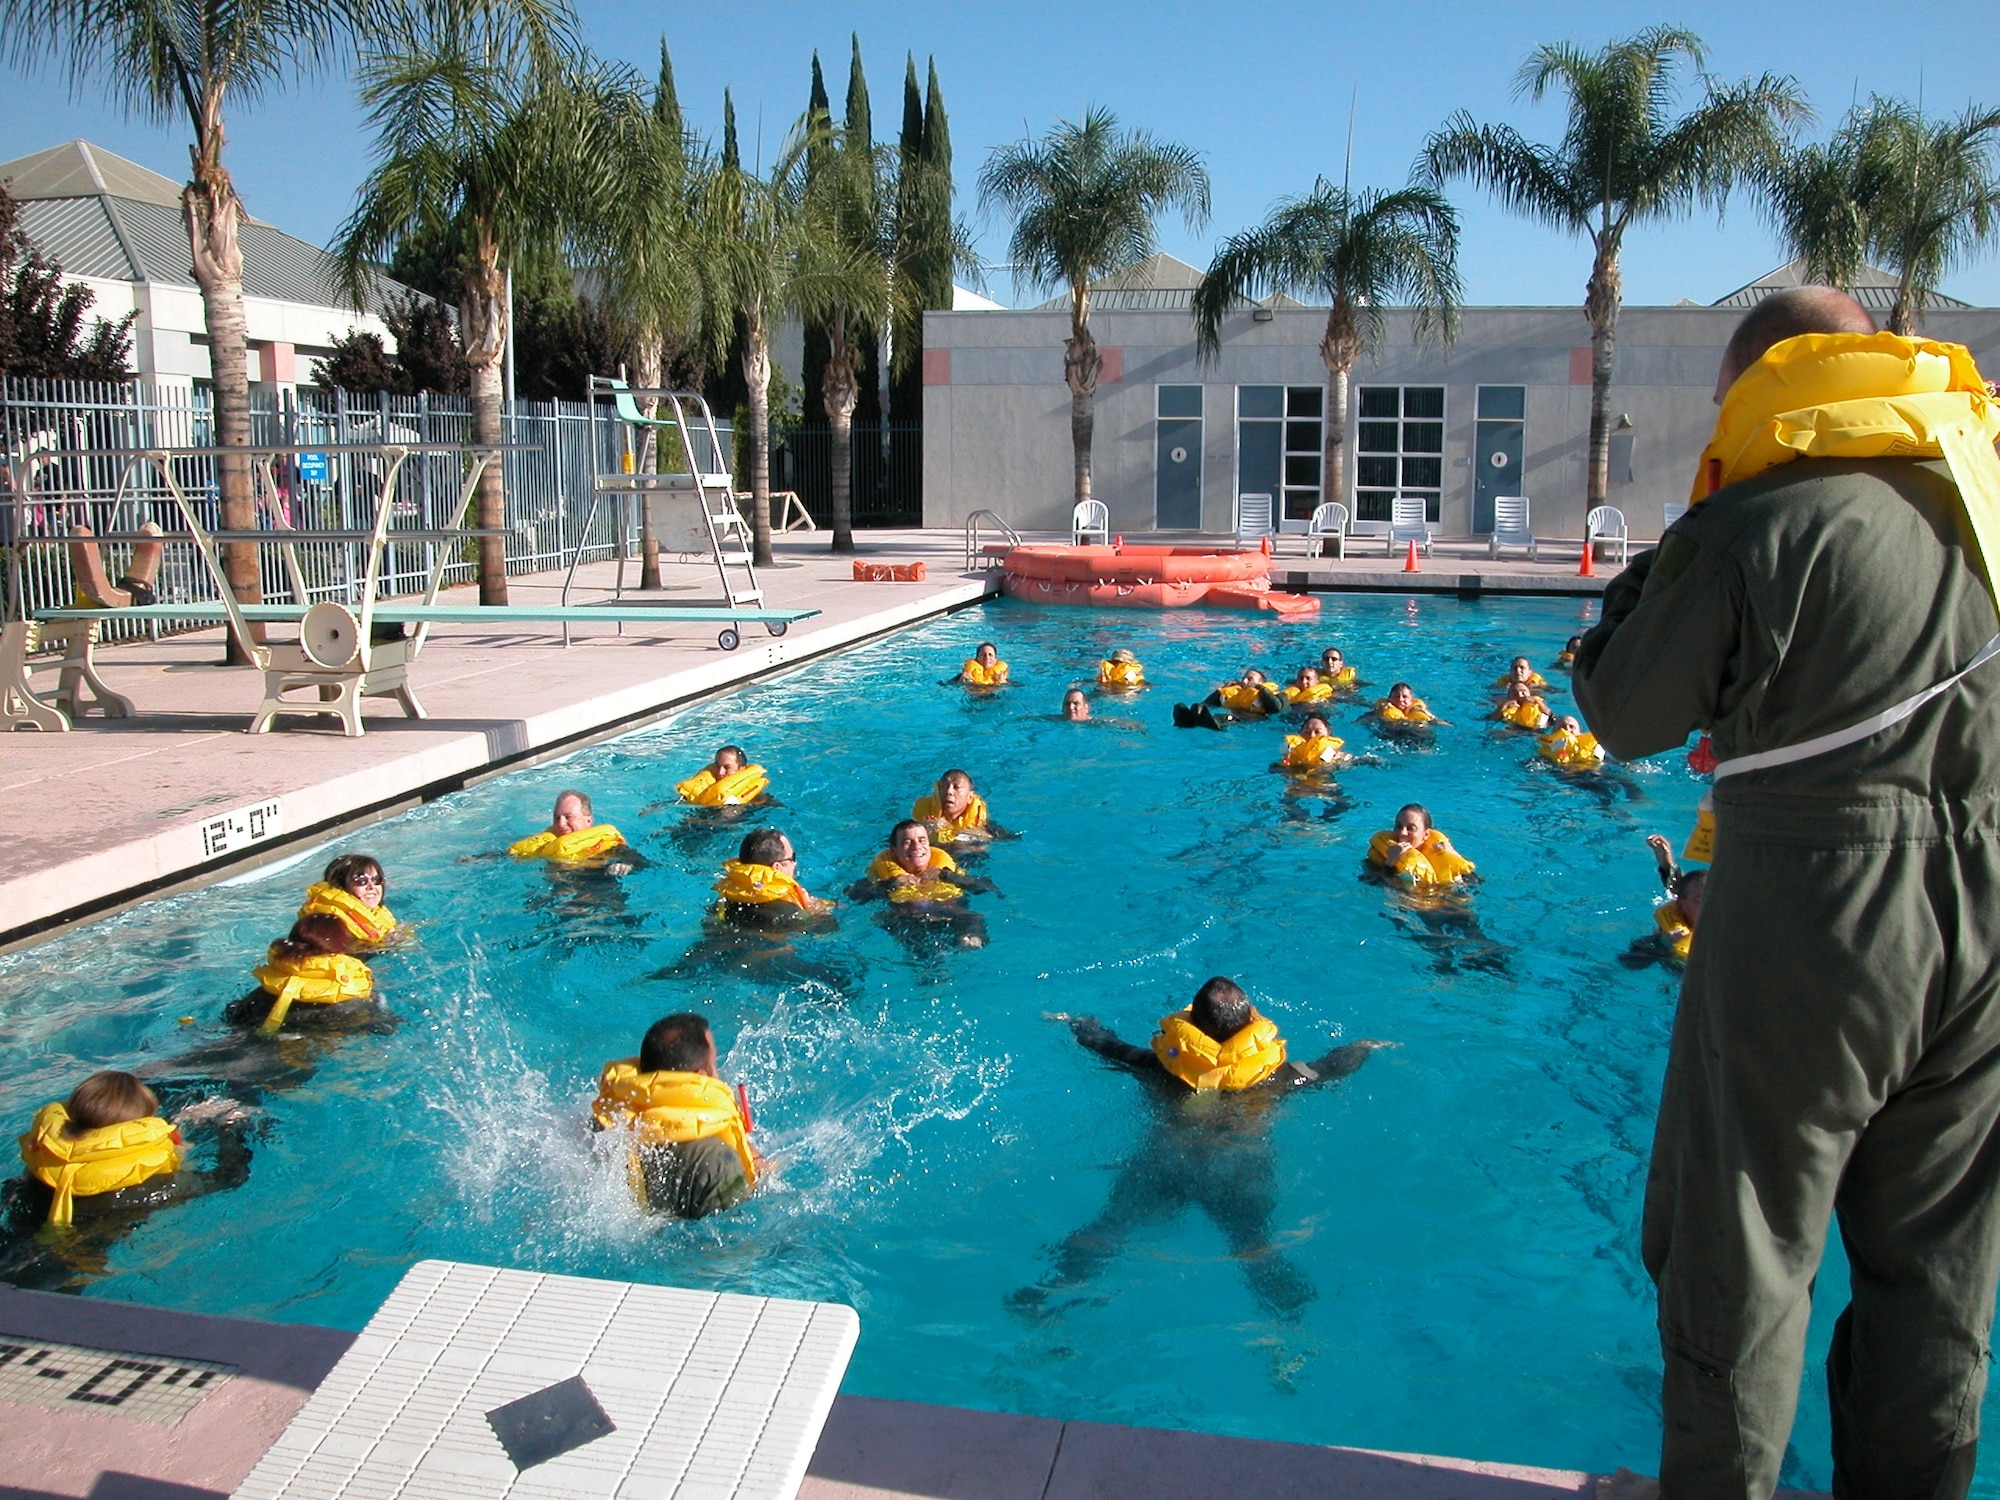 Crewmembers from the 336 ARS and the 729 AS enter the water and prepare to swim toward a 20-man life raft for boarding. (U.S. Air Force photo by Staff Sgt. Joe Davidson, 452 AMW/PA)